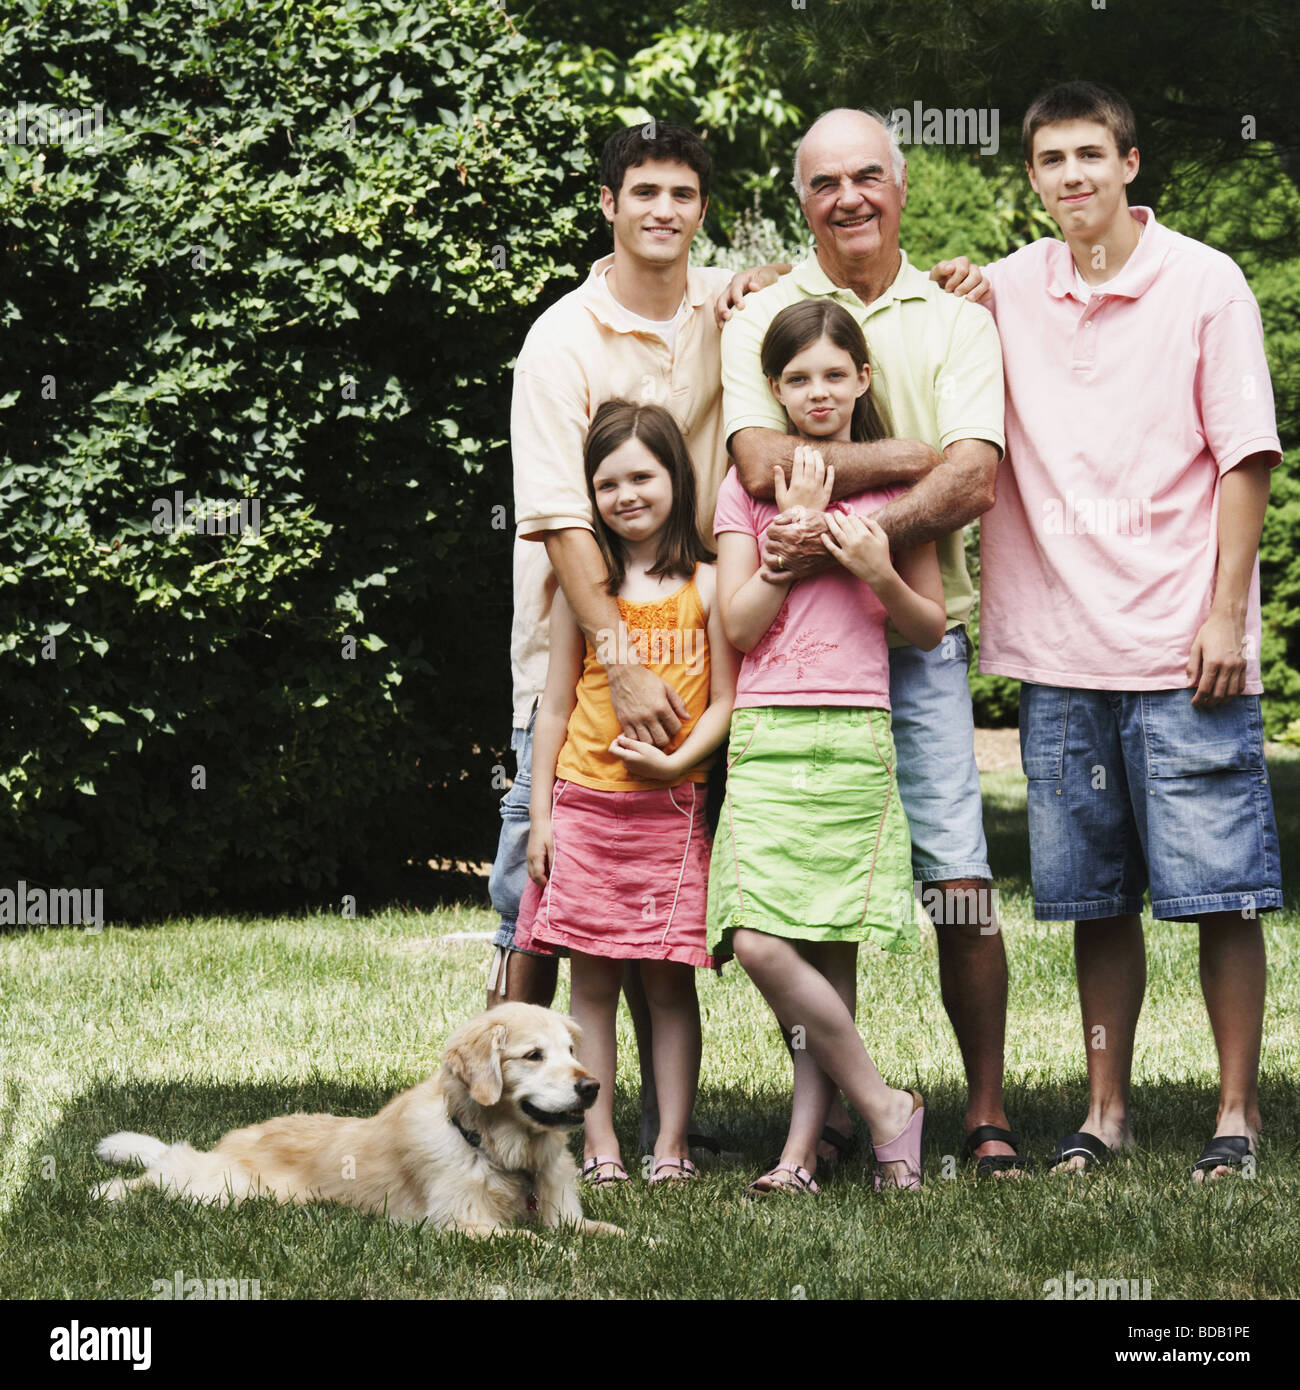 Senior man standing with his grandchildren and a dog in a park Stock Photo